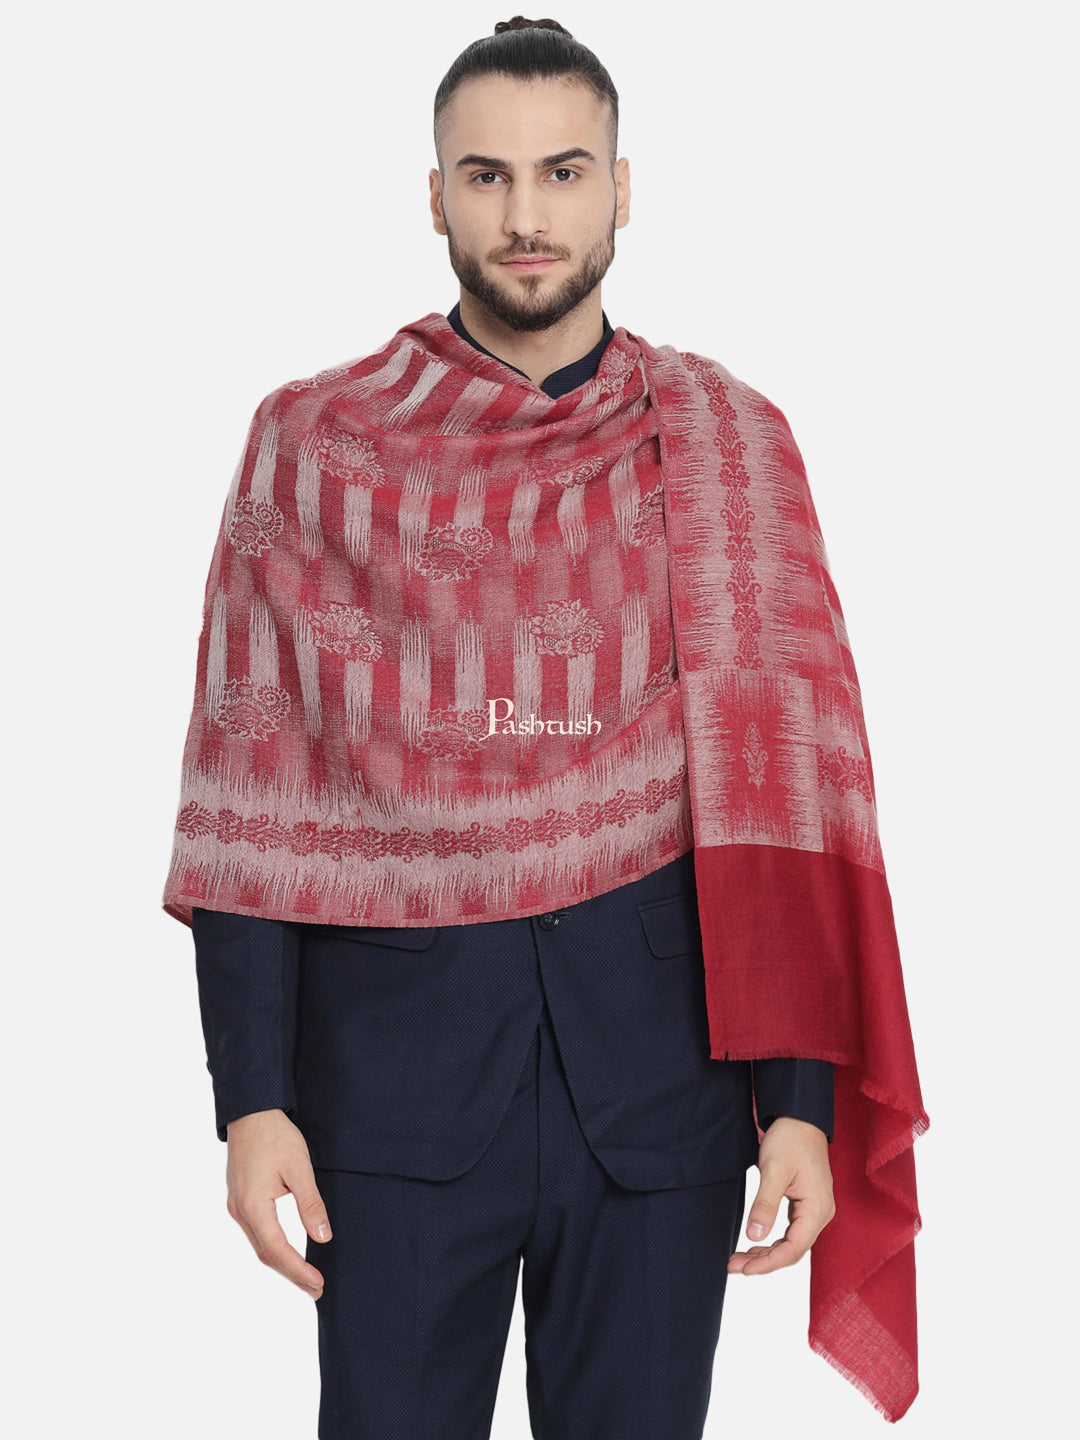 Pashtush India Mens Scarves Stoles and Mufflers Pashtush Mens Fine Wool Striped Red Muffler, Soft And Warm Stole Scarf